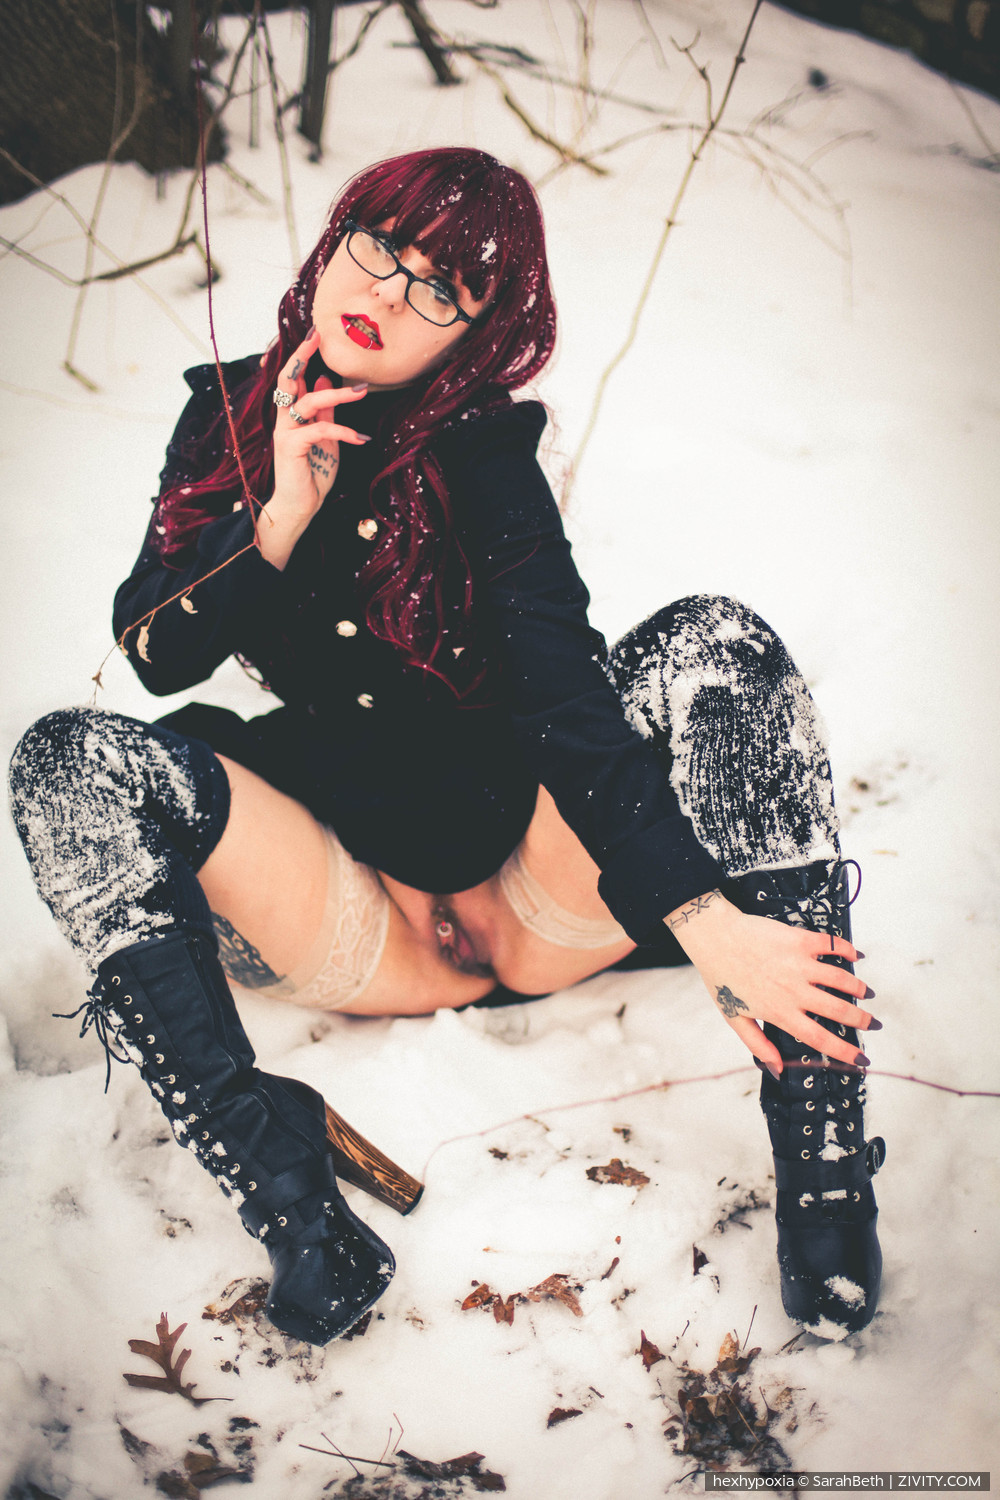 kandy kane huge tits big tits vintage busty legend candy kane high definition porn #HexHypoxia #redhair #tattooed #pierced #upskirtnopanties #bottomless #thighhighs #boots #snow #spread #flash #glasses #chubby #outdoors